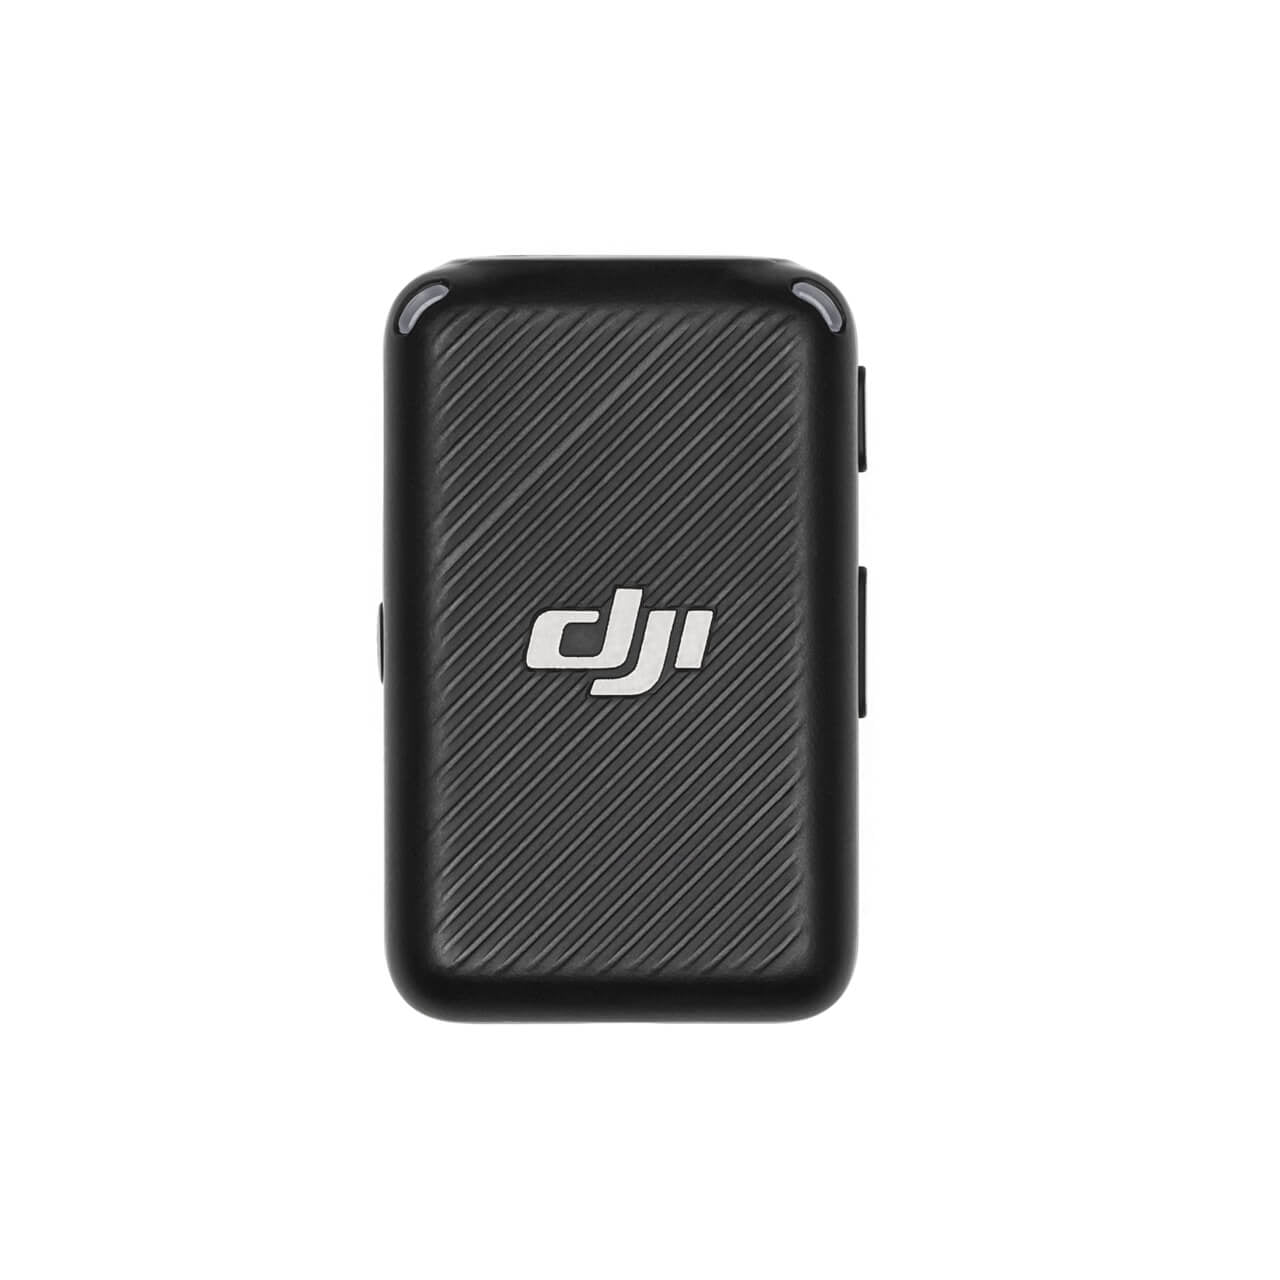 DJI Pocket 2 Microphone Mount for Cold / Hot Shoe Mics for 3.5mm Microphone  Adapter 